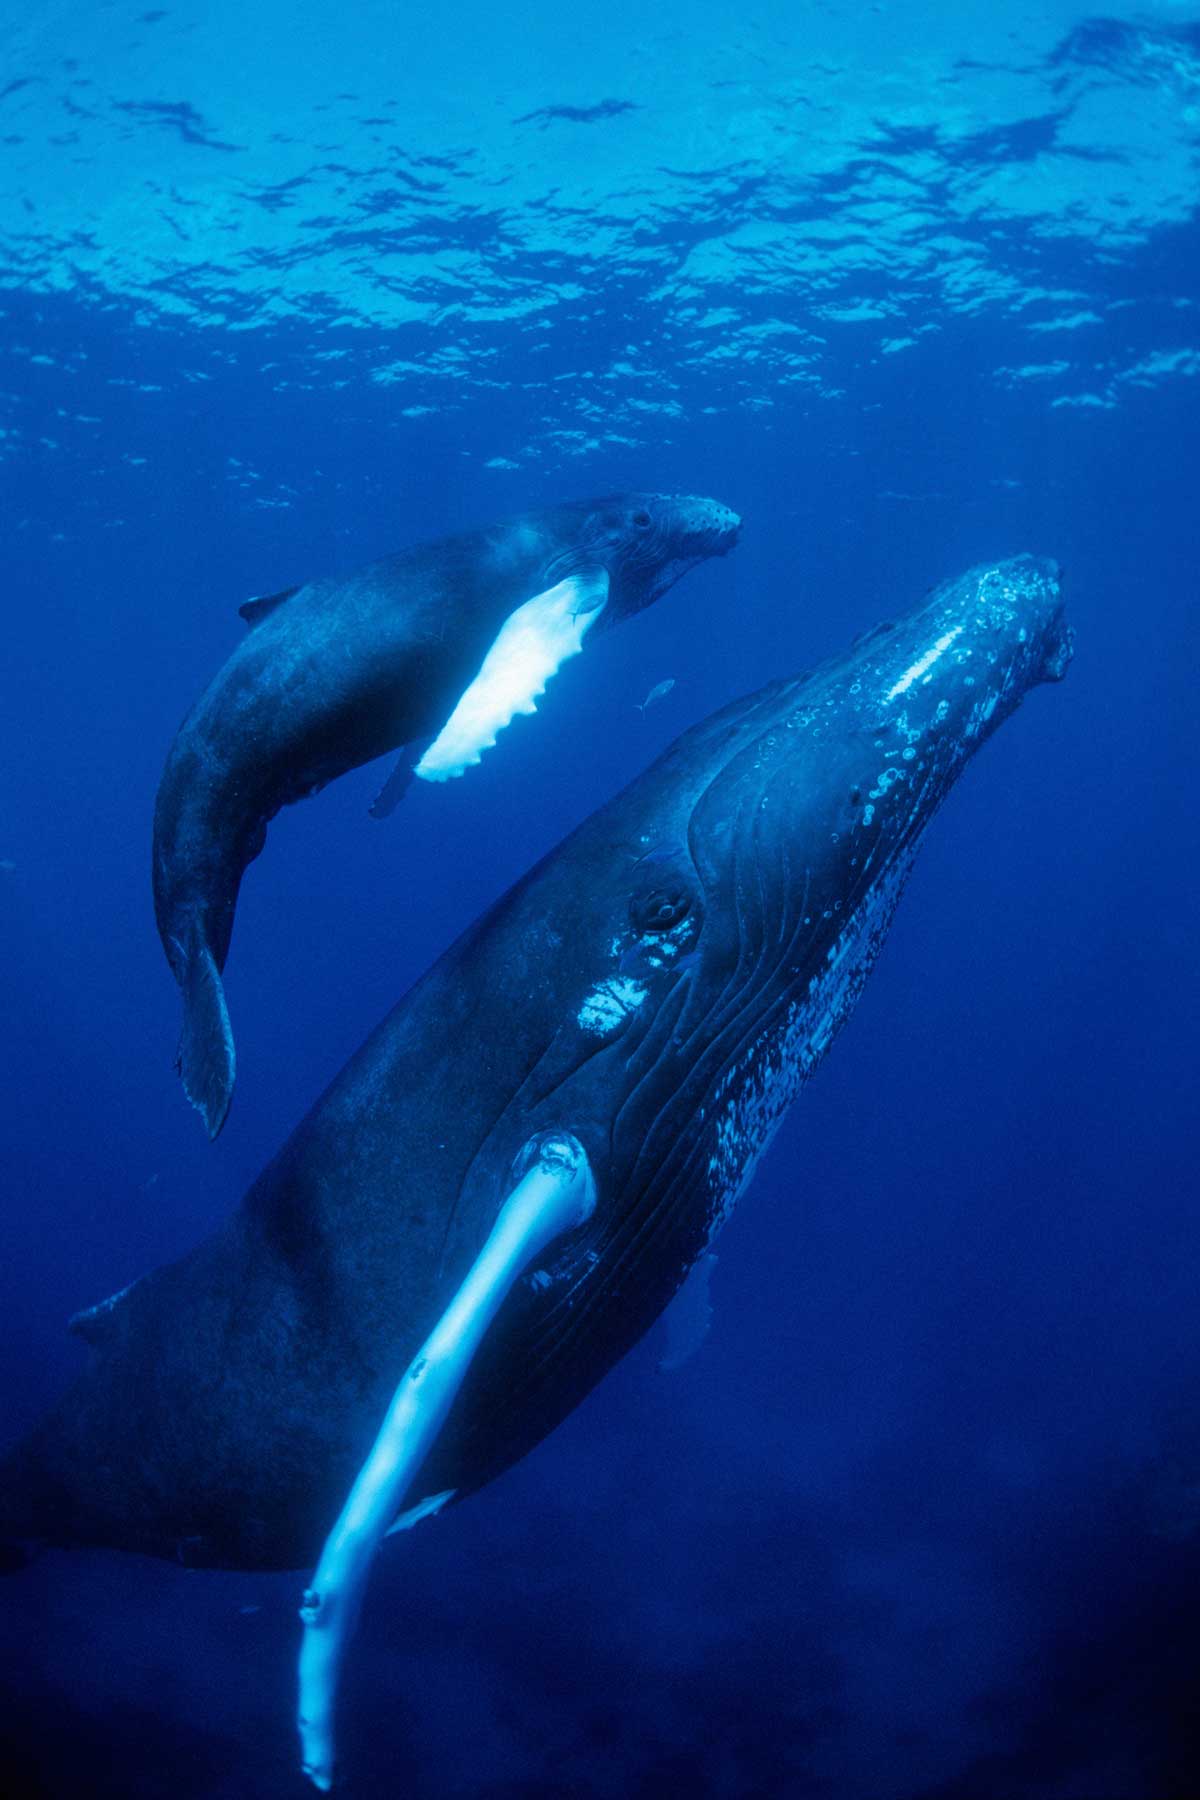 Adult and newborn whale swimming together.